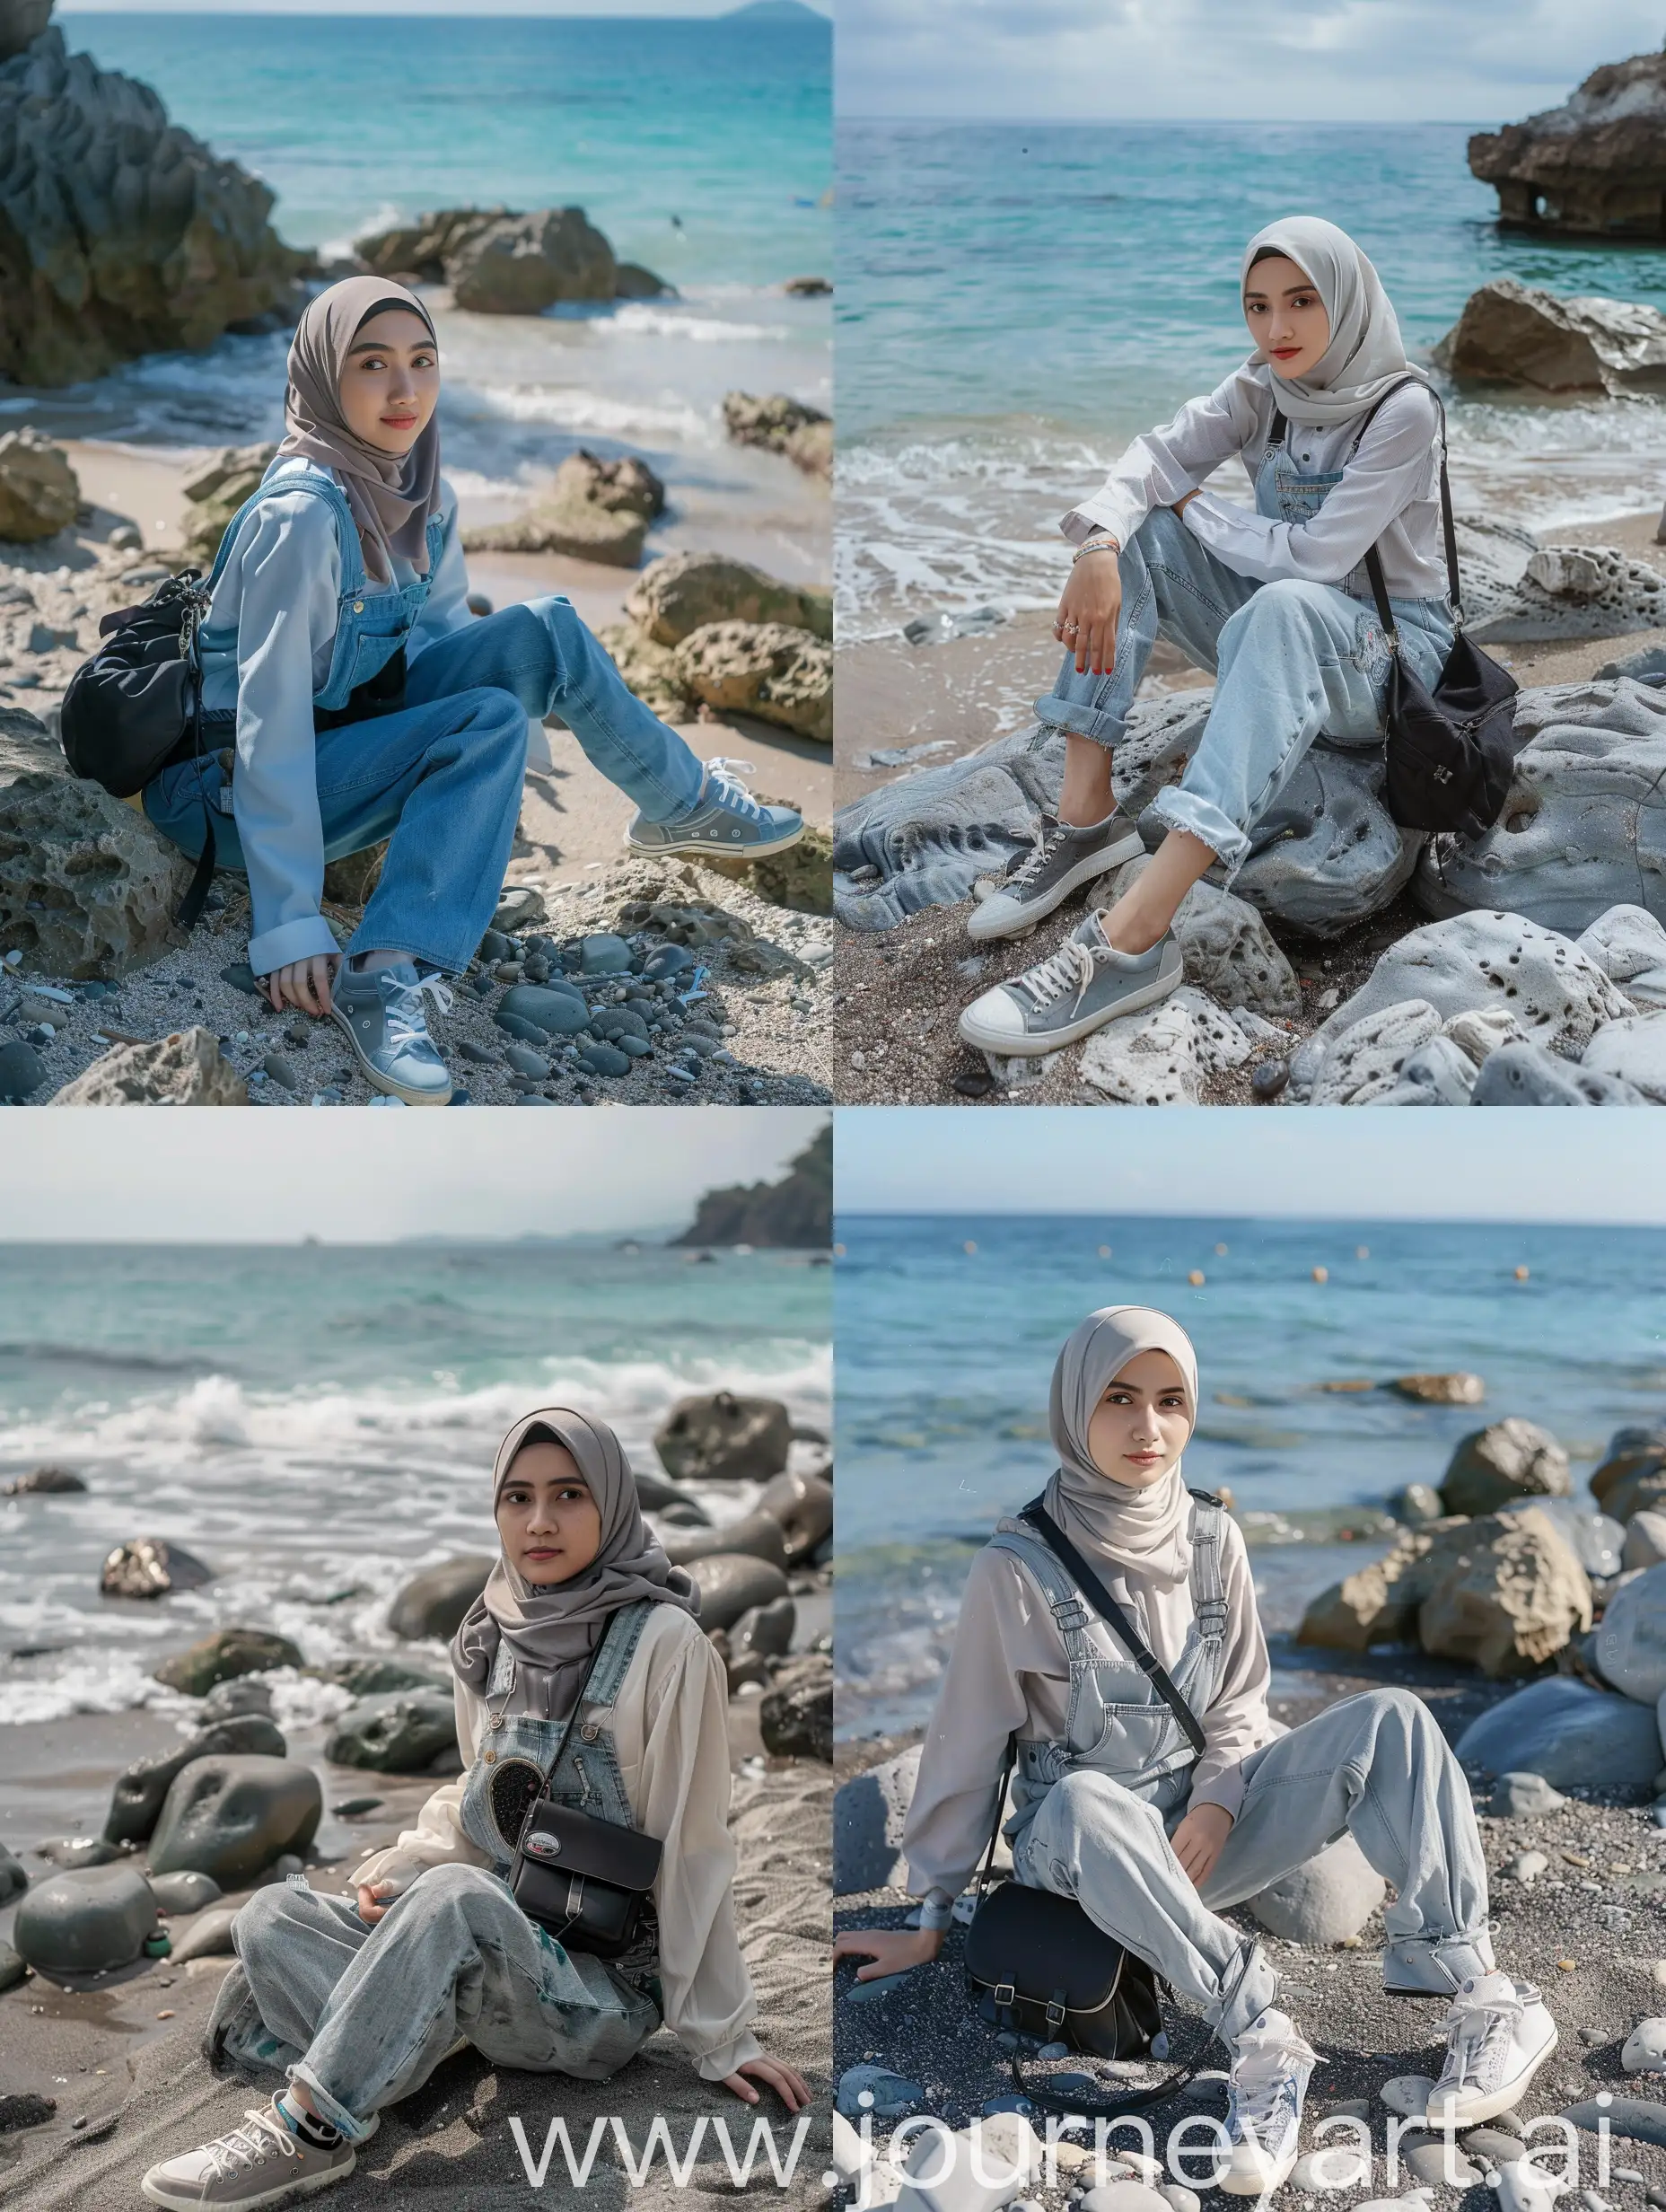 Indonesian-Hijab-Girl-Relaxing-on-Beach-Rocks-with-Leica-Camera